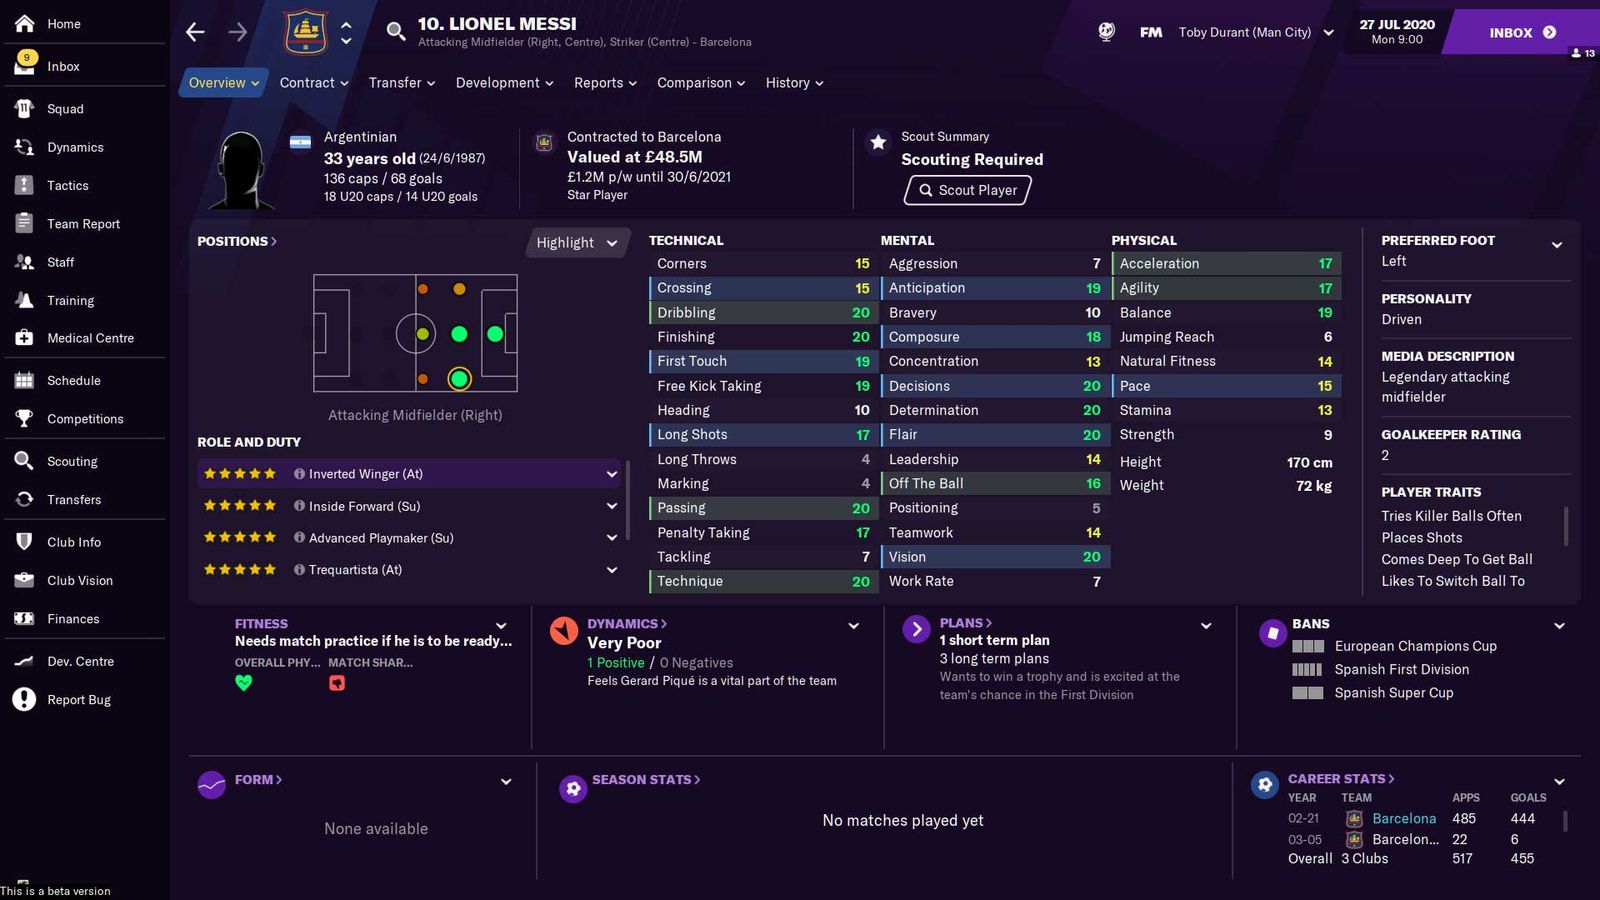 Lionel Messi's stats in Football Manager 2021